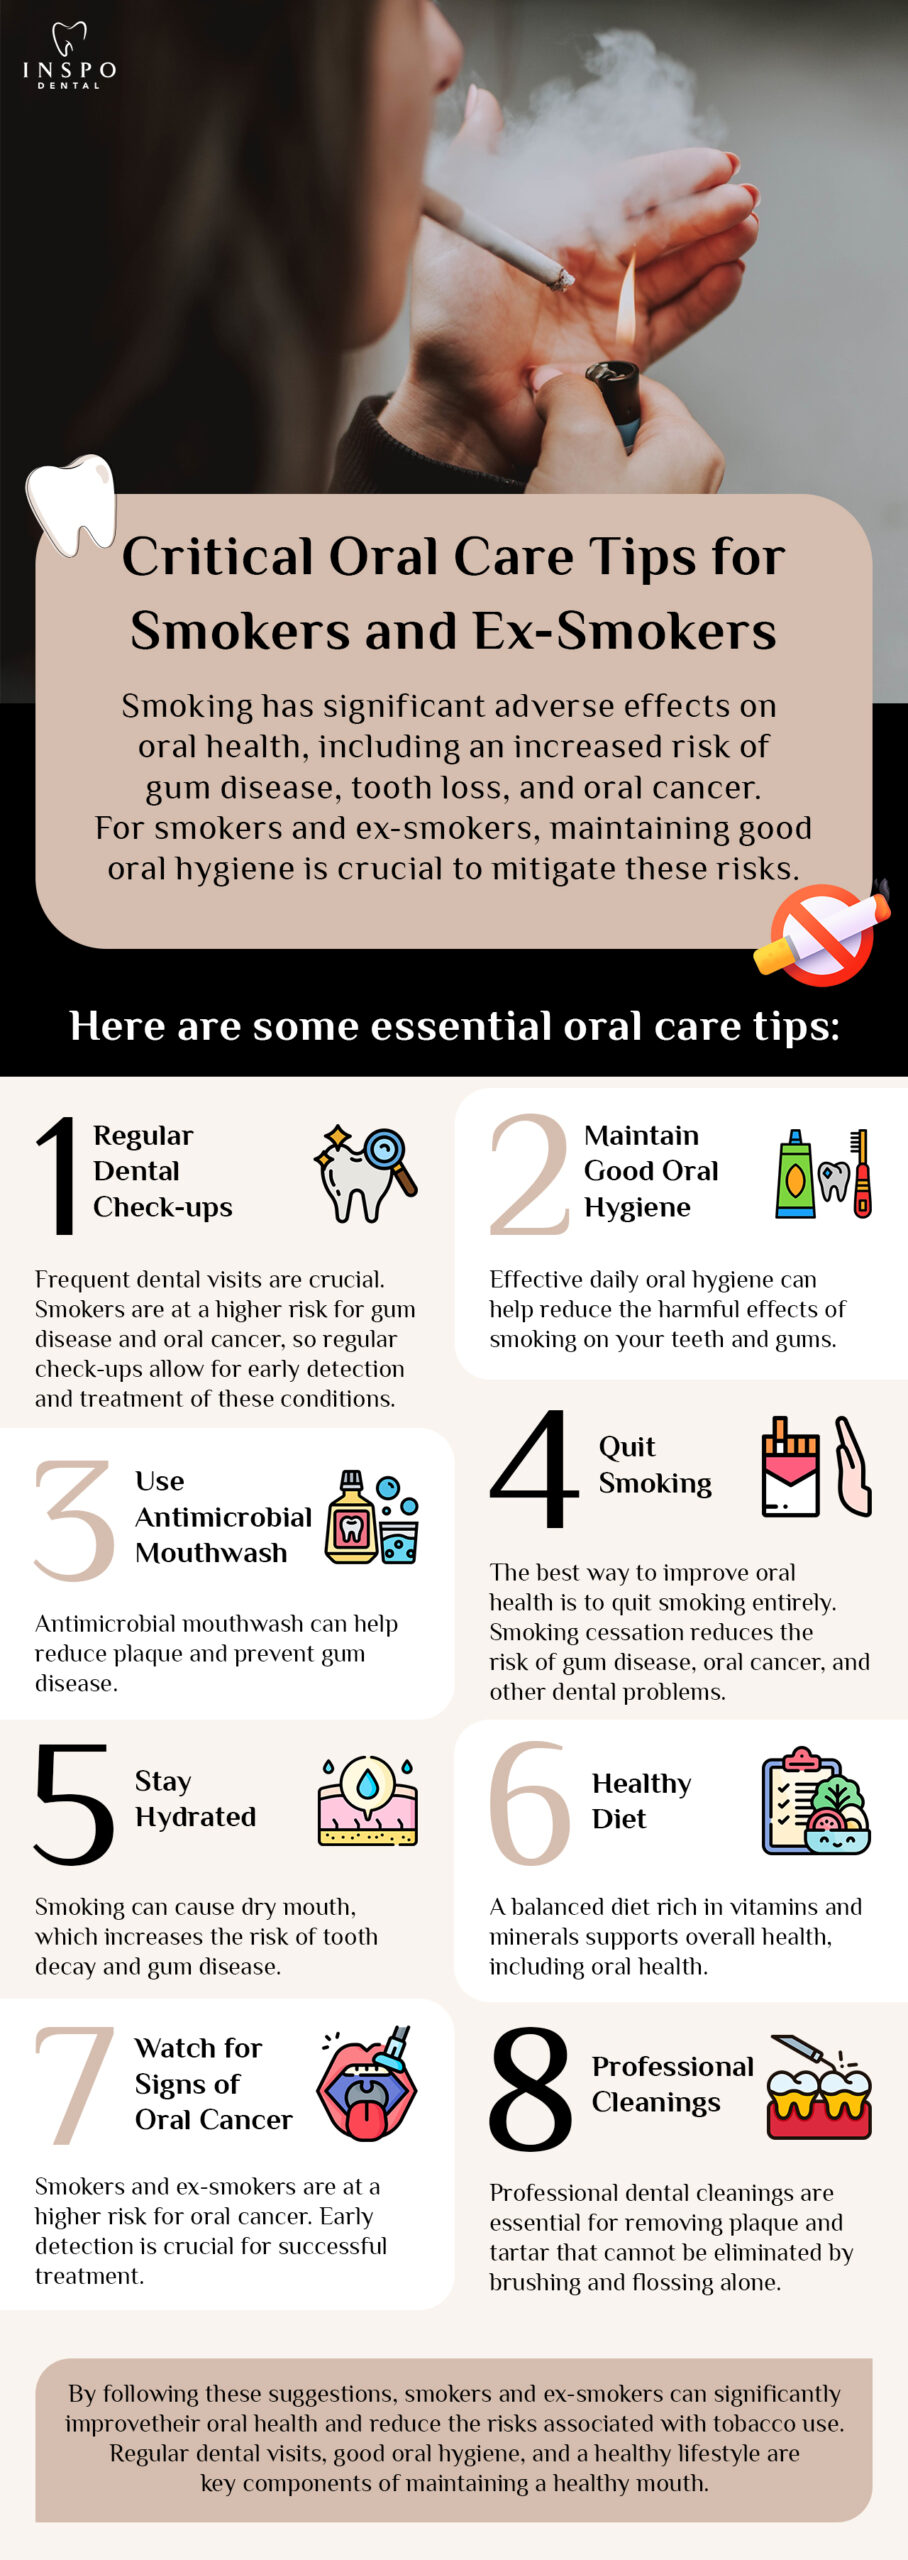 Critical Oral Care Tips for Smokers and Ex-Smokers - Inspo Dental